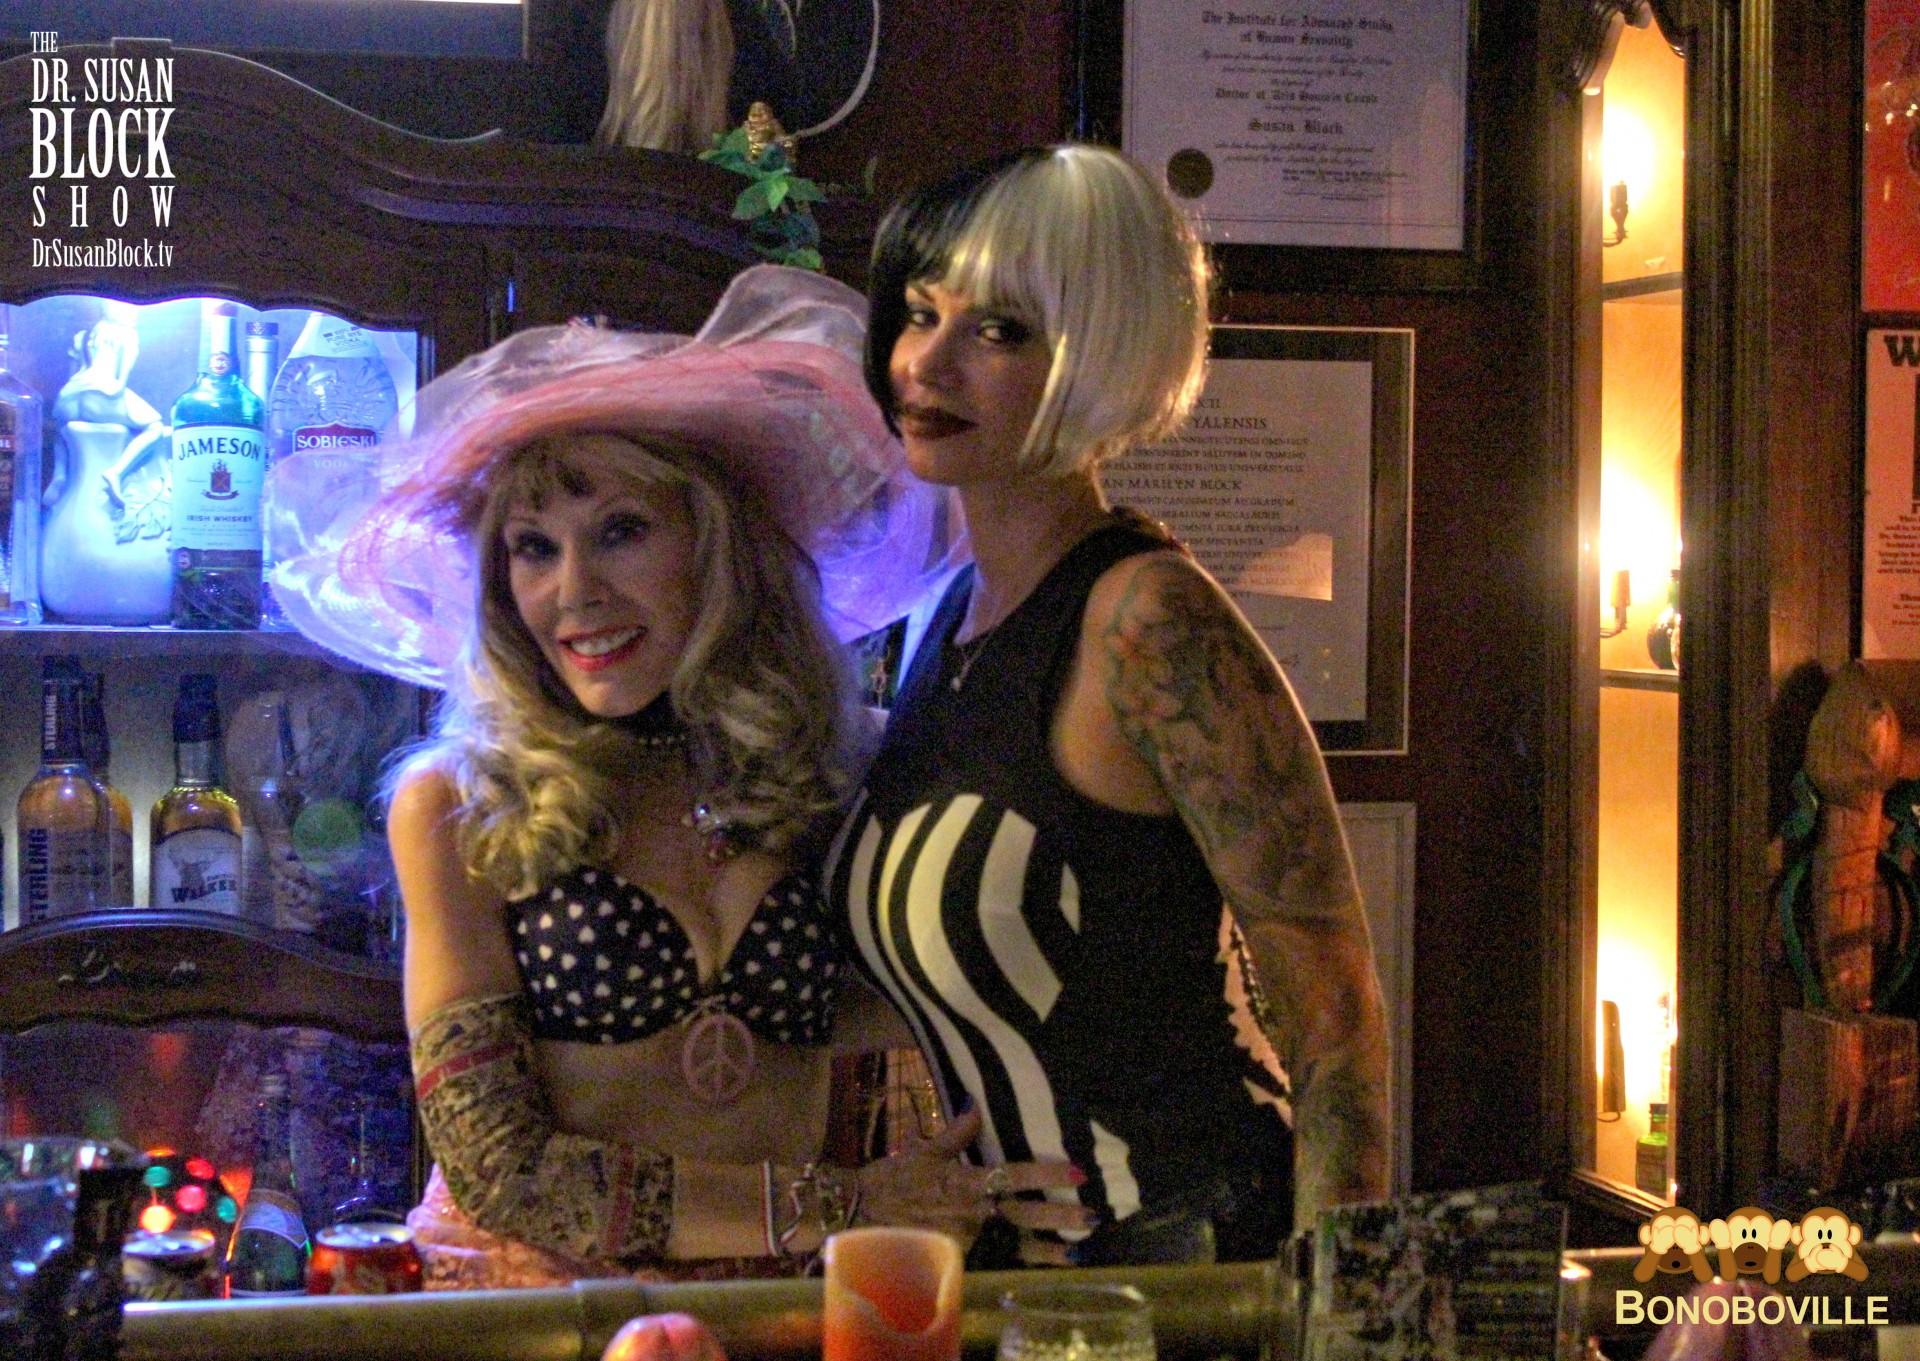 With Shannon, Mistress of the Bonoboville Bar. Photo: Sarah Bella